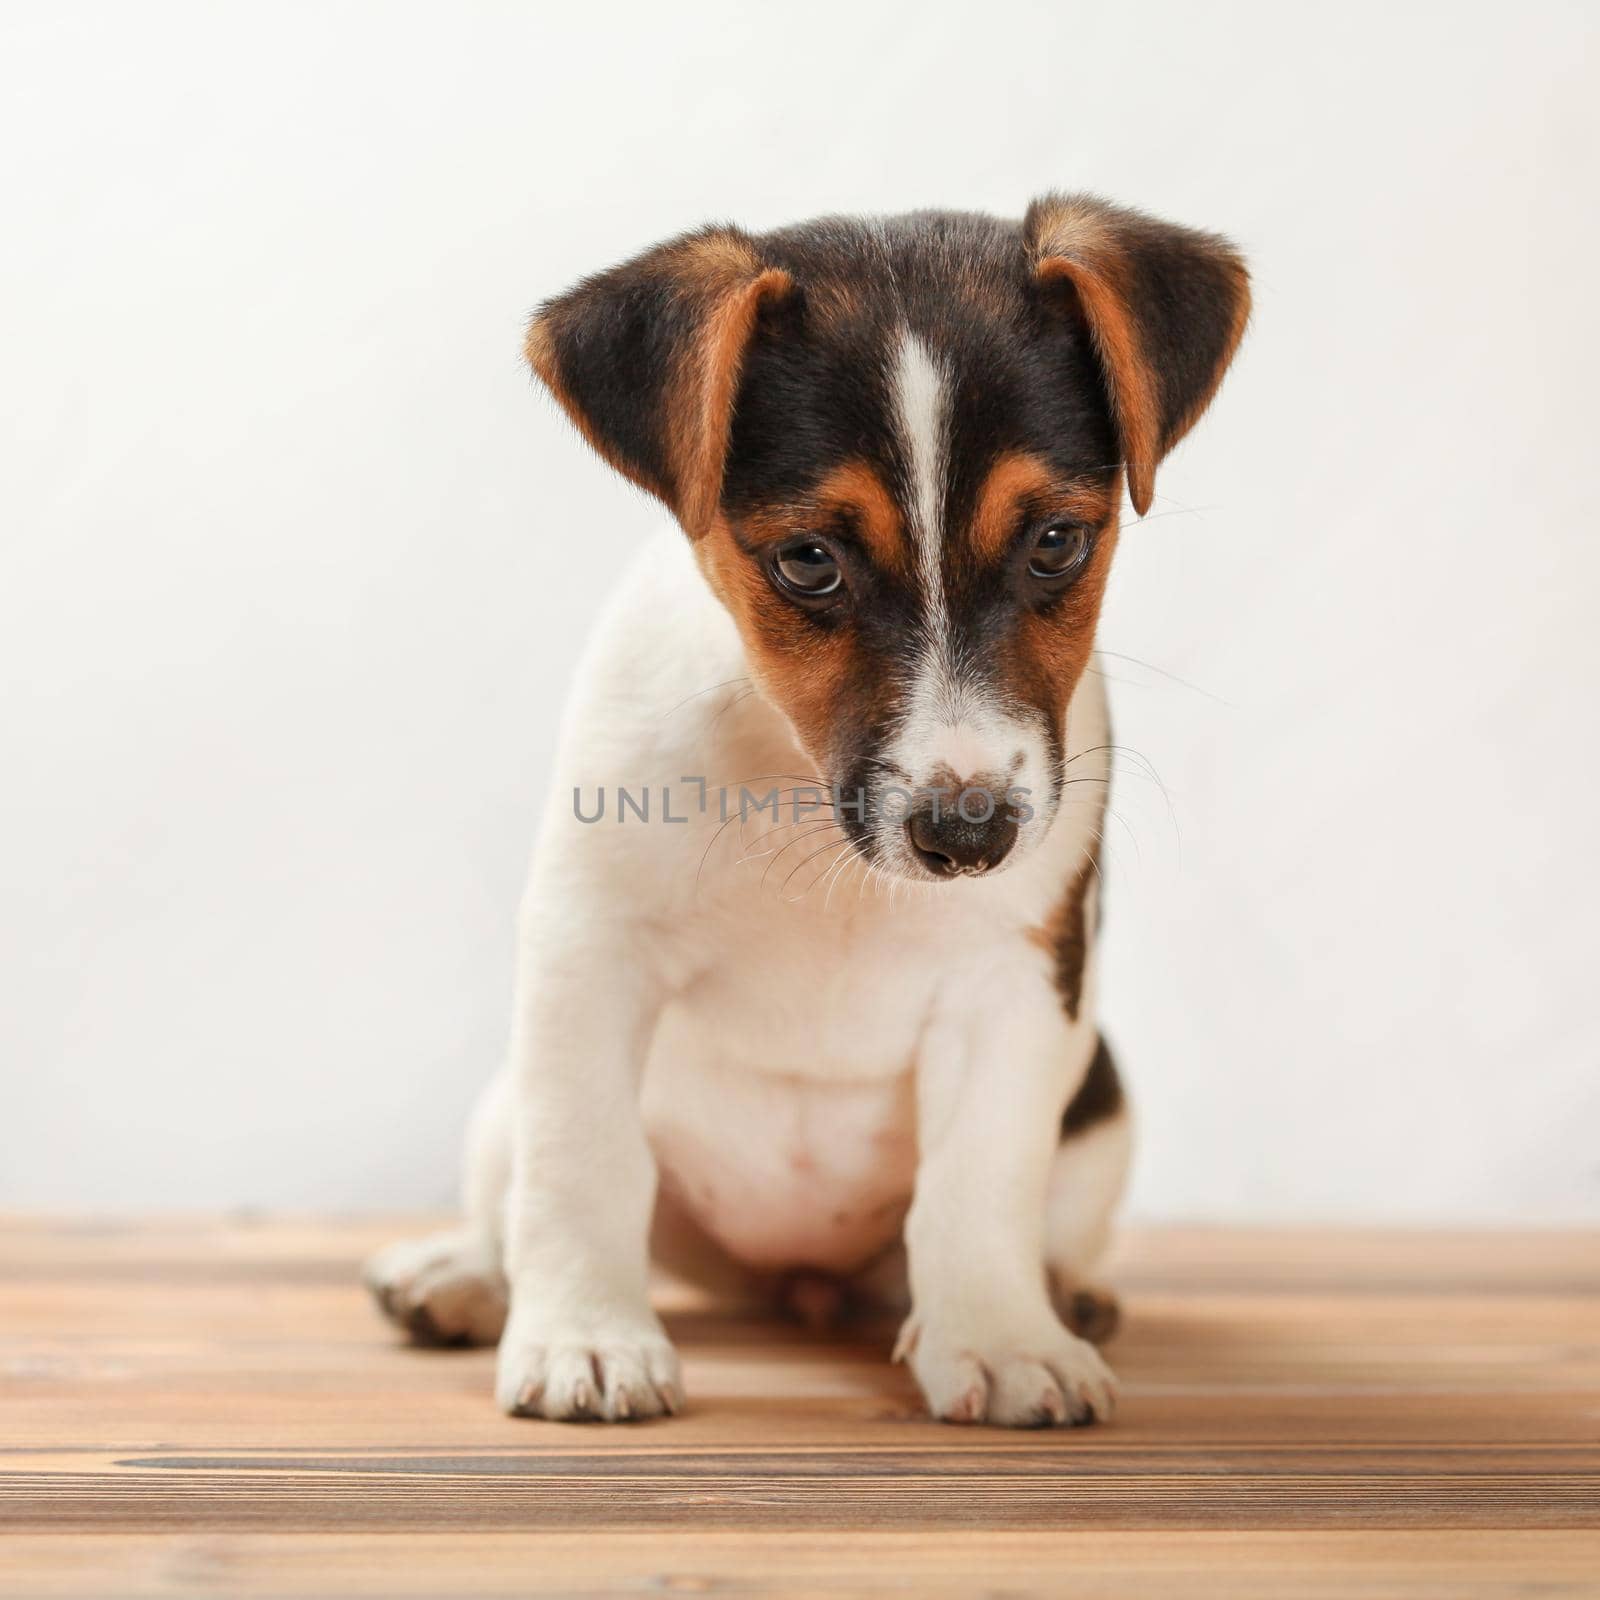 Two months old Jack Russell terrier puppy, shy, looking down, standing on board floor with white background. by Ivanko